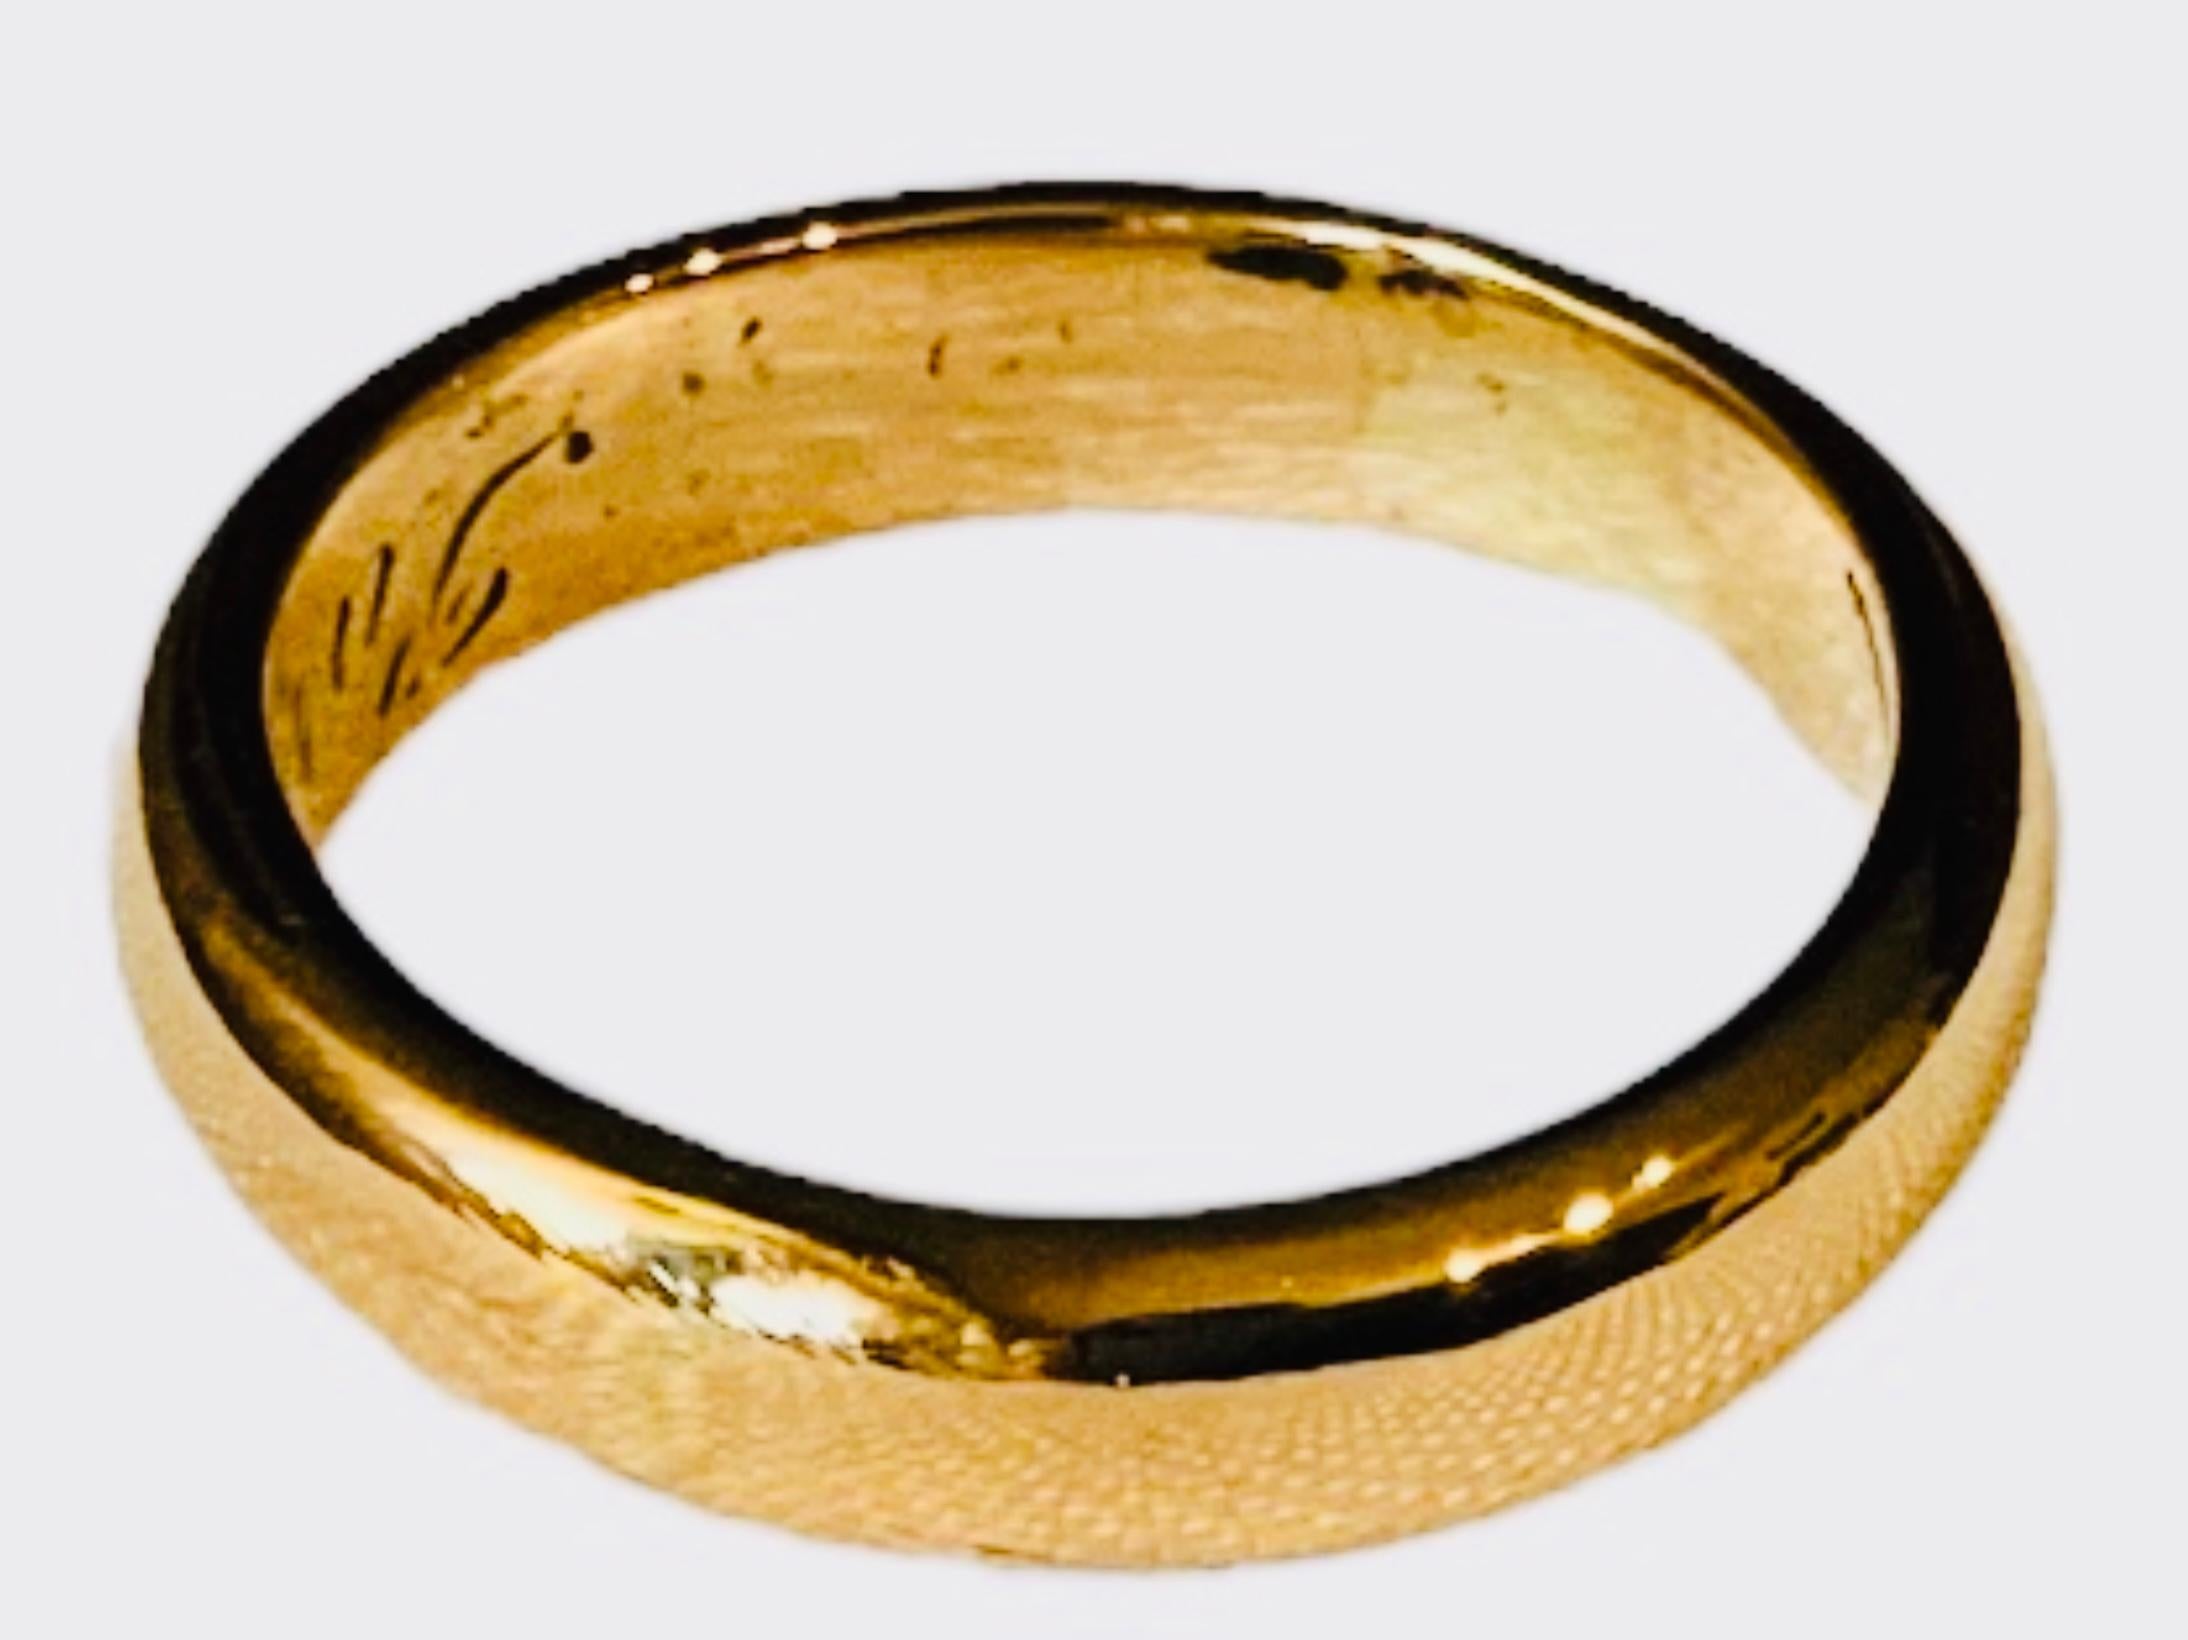  Gold Band Wedding Ring For Sale 1